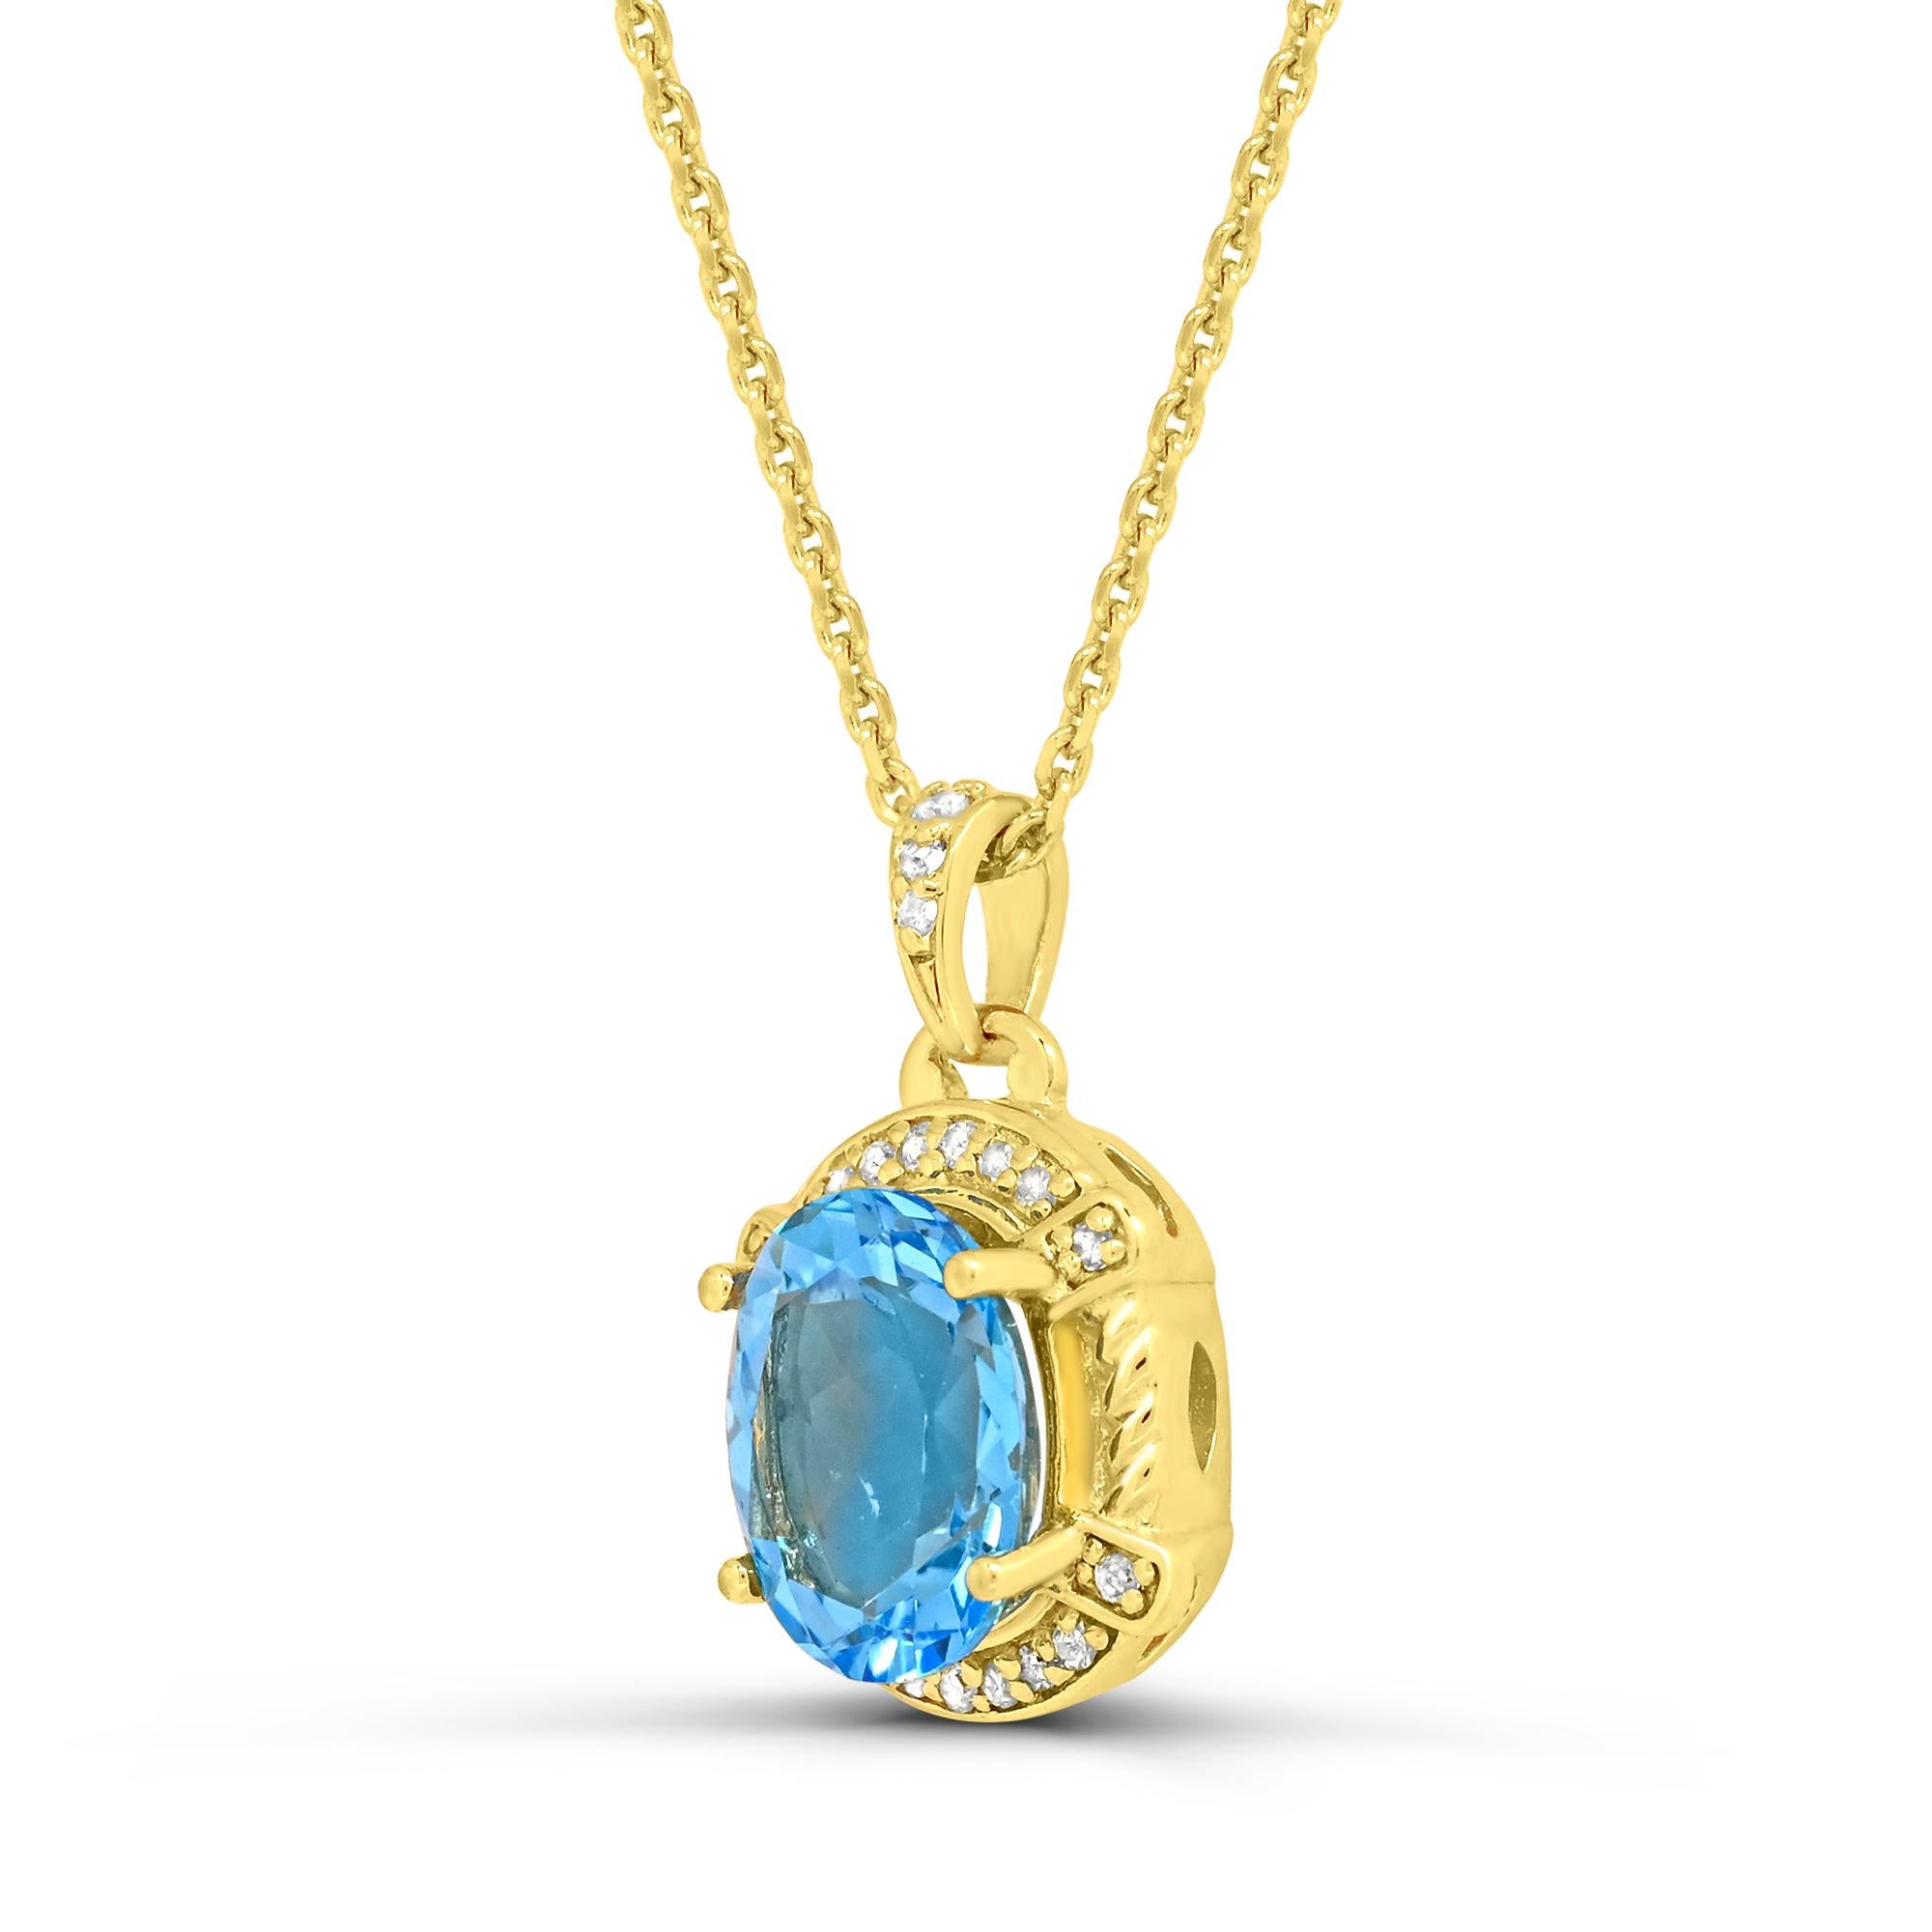 Indulge in the elegance of our Oval Swiss Blue Topaz and White Diamond Accent Pendant Necklace in 18K Yellow Gold over Sterling Silver. Crafted with meticulous attention to detail, this necklace boasts a shining combination of oval Swiss blue topaz